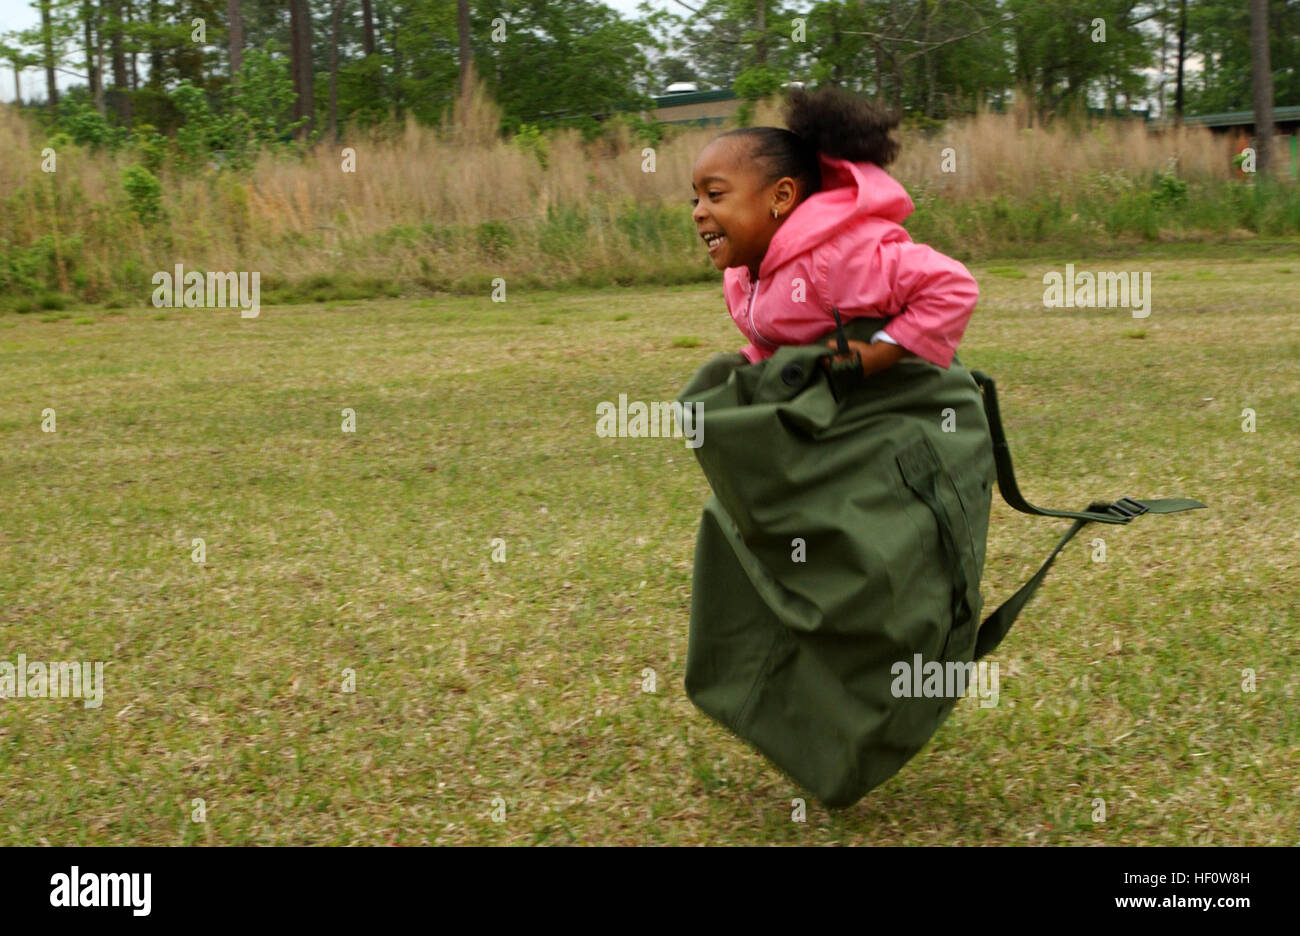 050504-M-1188A-003 CAMP LEJEUNE, N.C. (May 4, 2005) — Tamia Covington, 5, races down the field during the sea bag race here May 4. More than 15 Marines with Headquarters and Service Battalion, 2nd Supply Battalion, 2nd Force Service Support Group, introduced various Marine Corps issued gear to students at the Tarawa Terrace 1 Primary School. (U.S. Marine Corps Photo by Lance Cpl. Joel Abshier)(Released) USMC-050504-M-1188A-003 Stock Photo